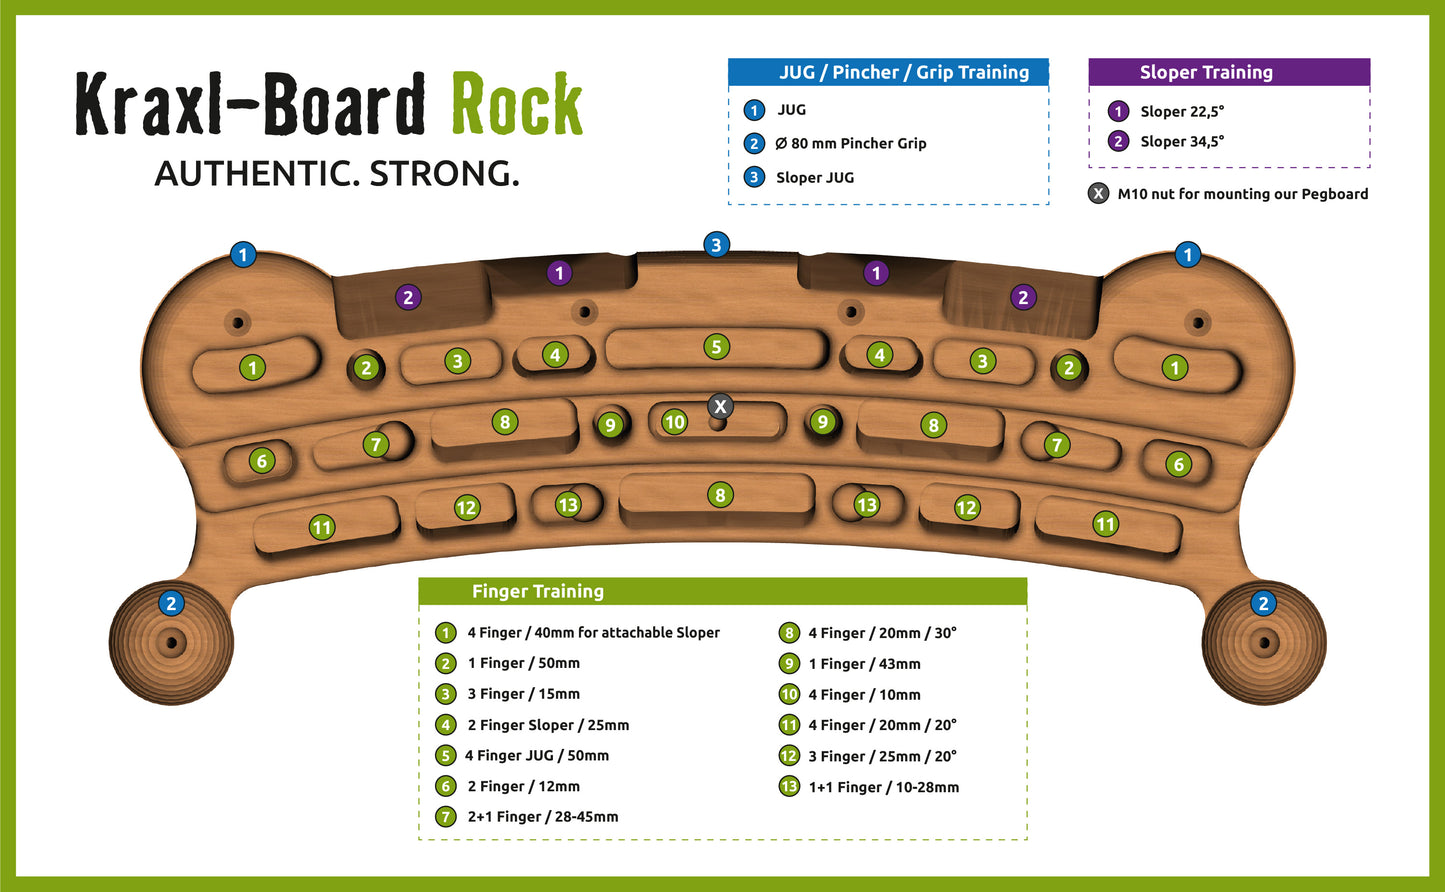 Kraxlboard Rock - Our complete package for beginners and professionals. Large grip selection and expandable